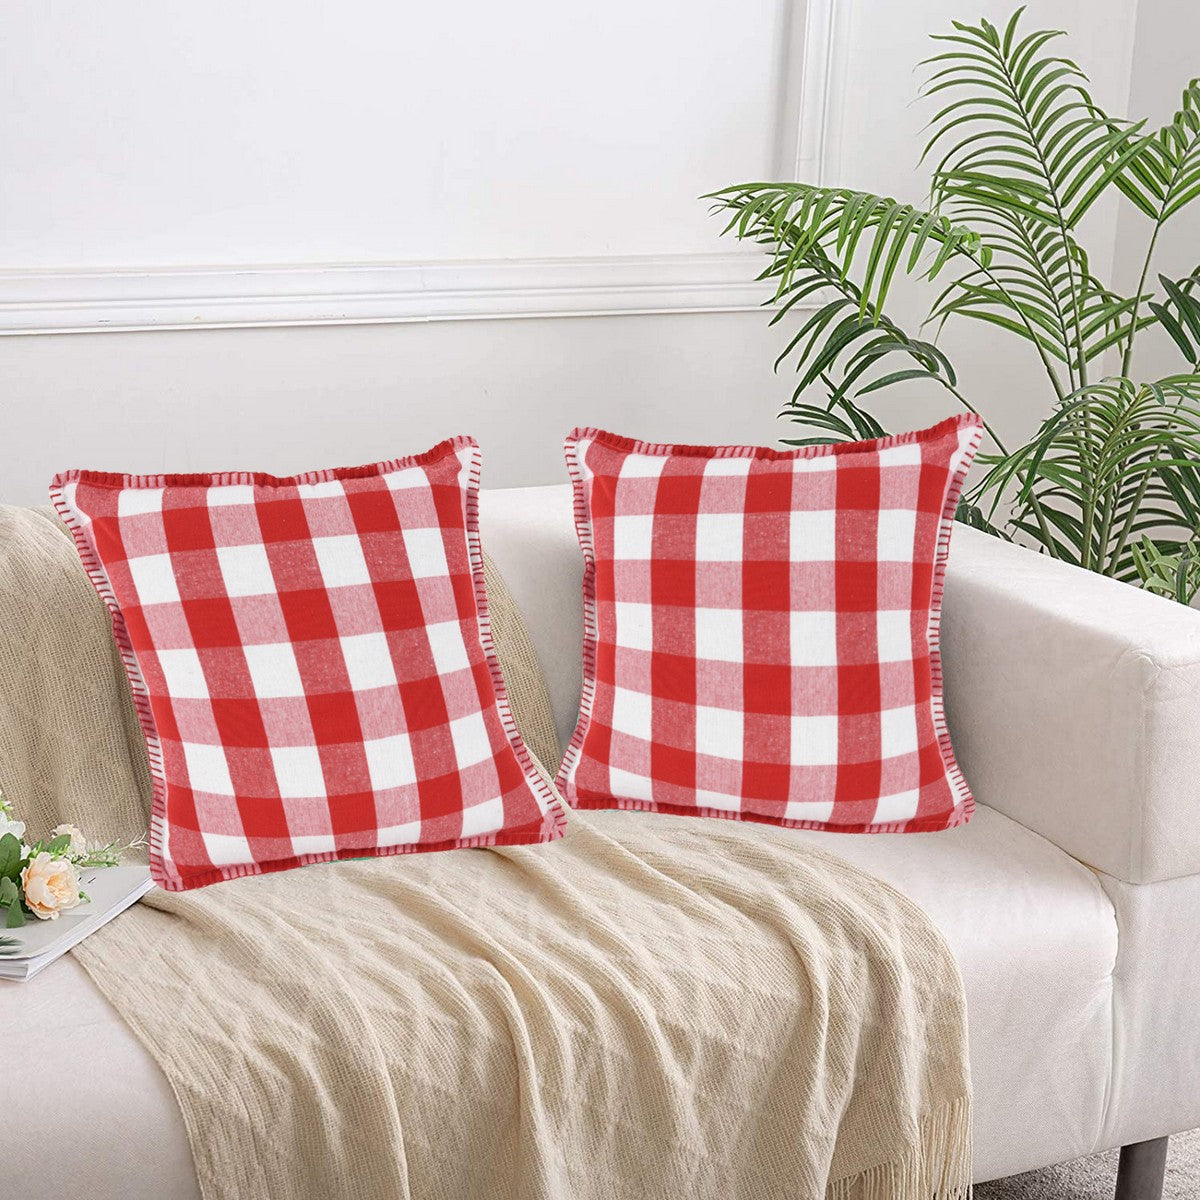 Lushomes Square Cushion Cover with Blanket Stitch, Cotton Sofa Pillow Cover Set of 2, 20x20 Inch, Big Checks, Red and White Checks, Pillow Cushions Covers (Pack of 2, 50x50 Cms)